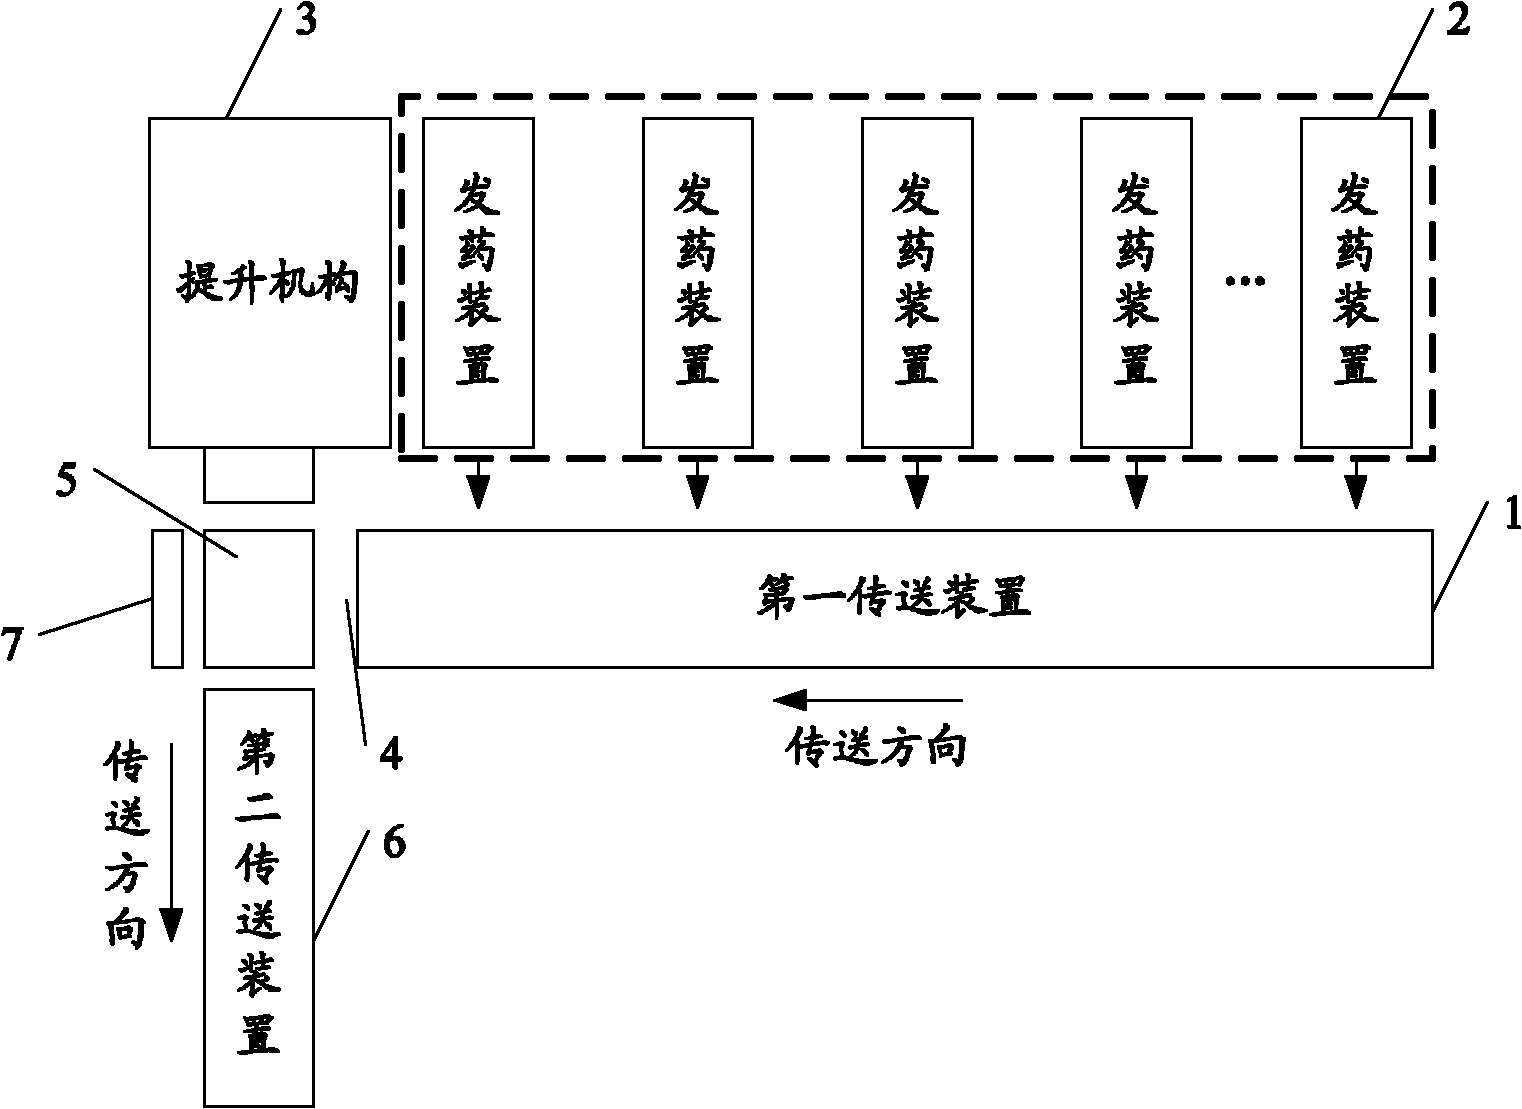 Dispensing system, control end and dispensing method